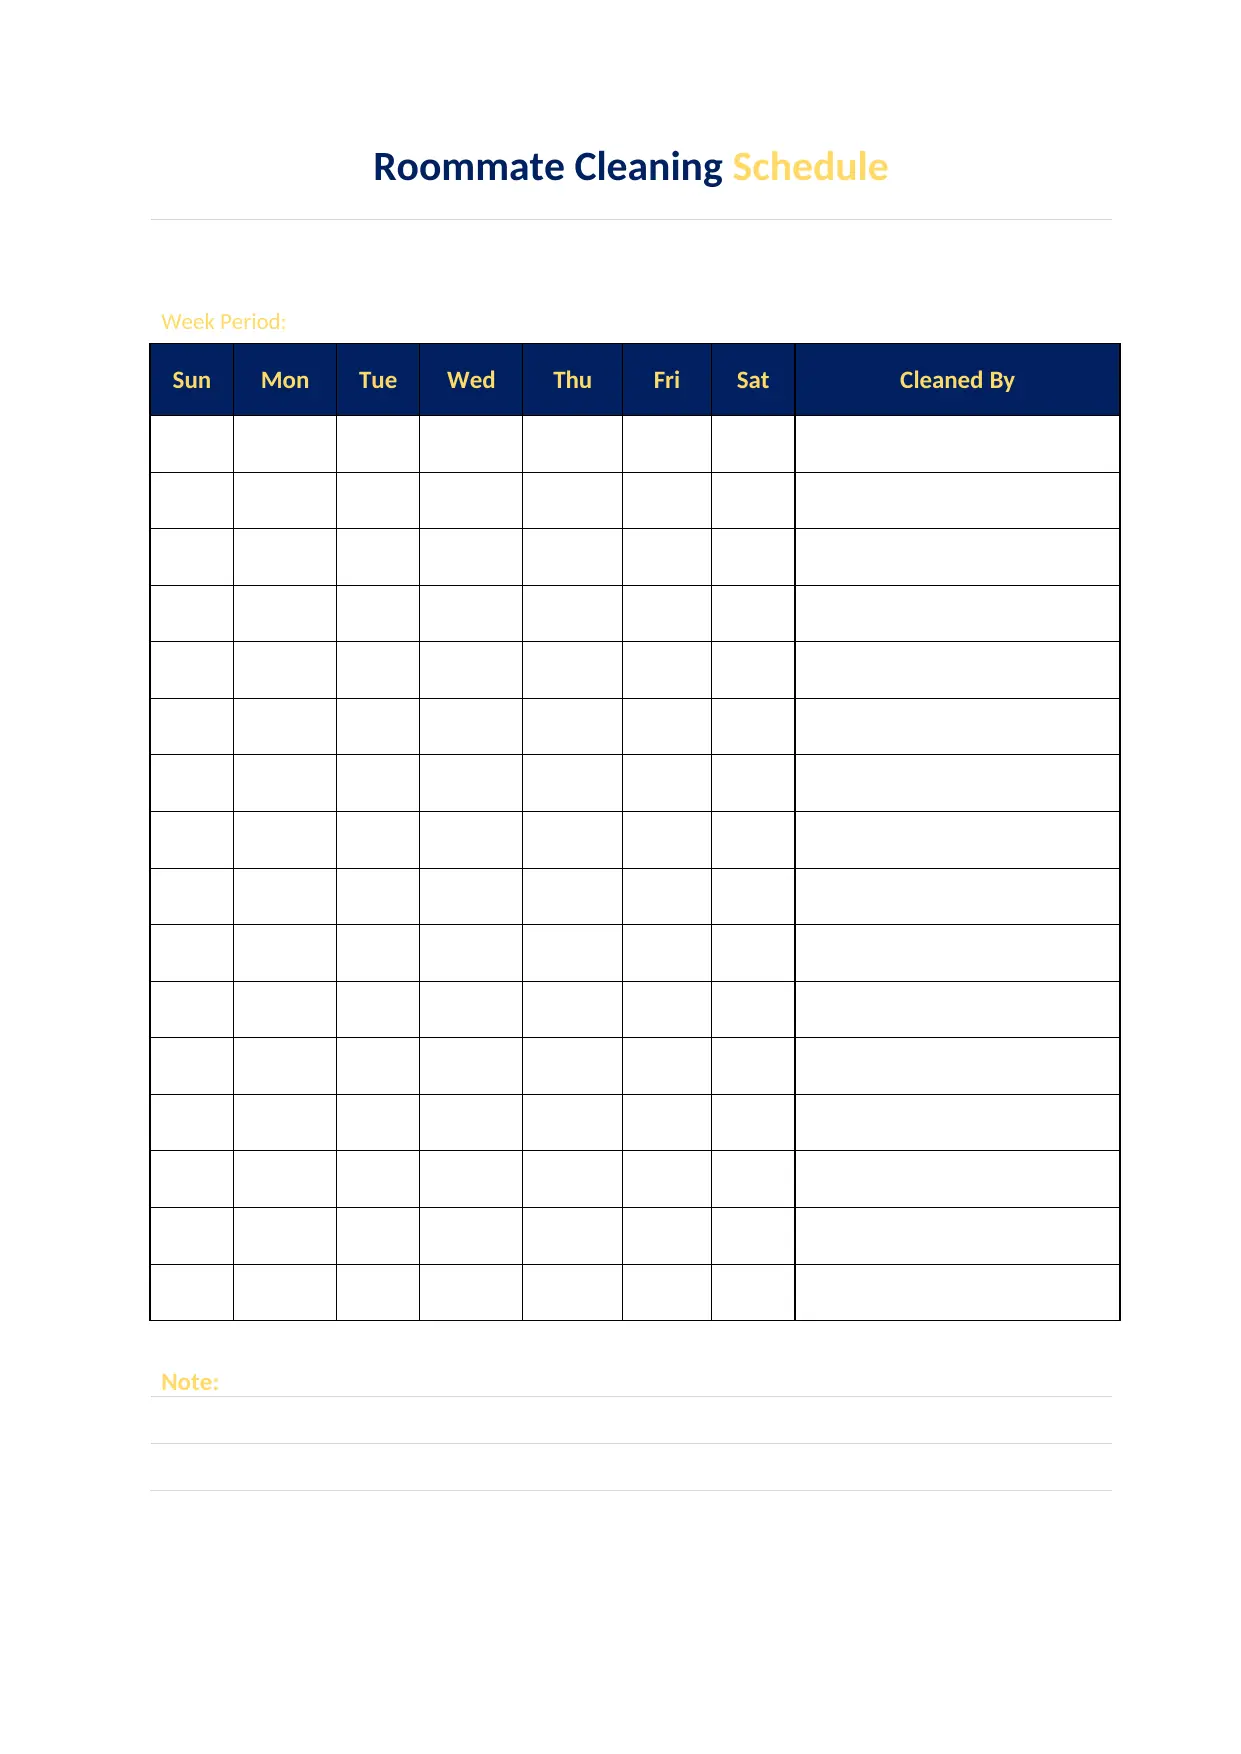 Free Roommate Cleaning Schedule Template: Word PPT PDF